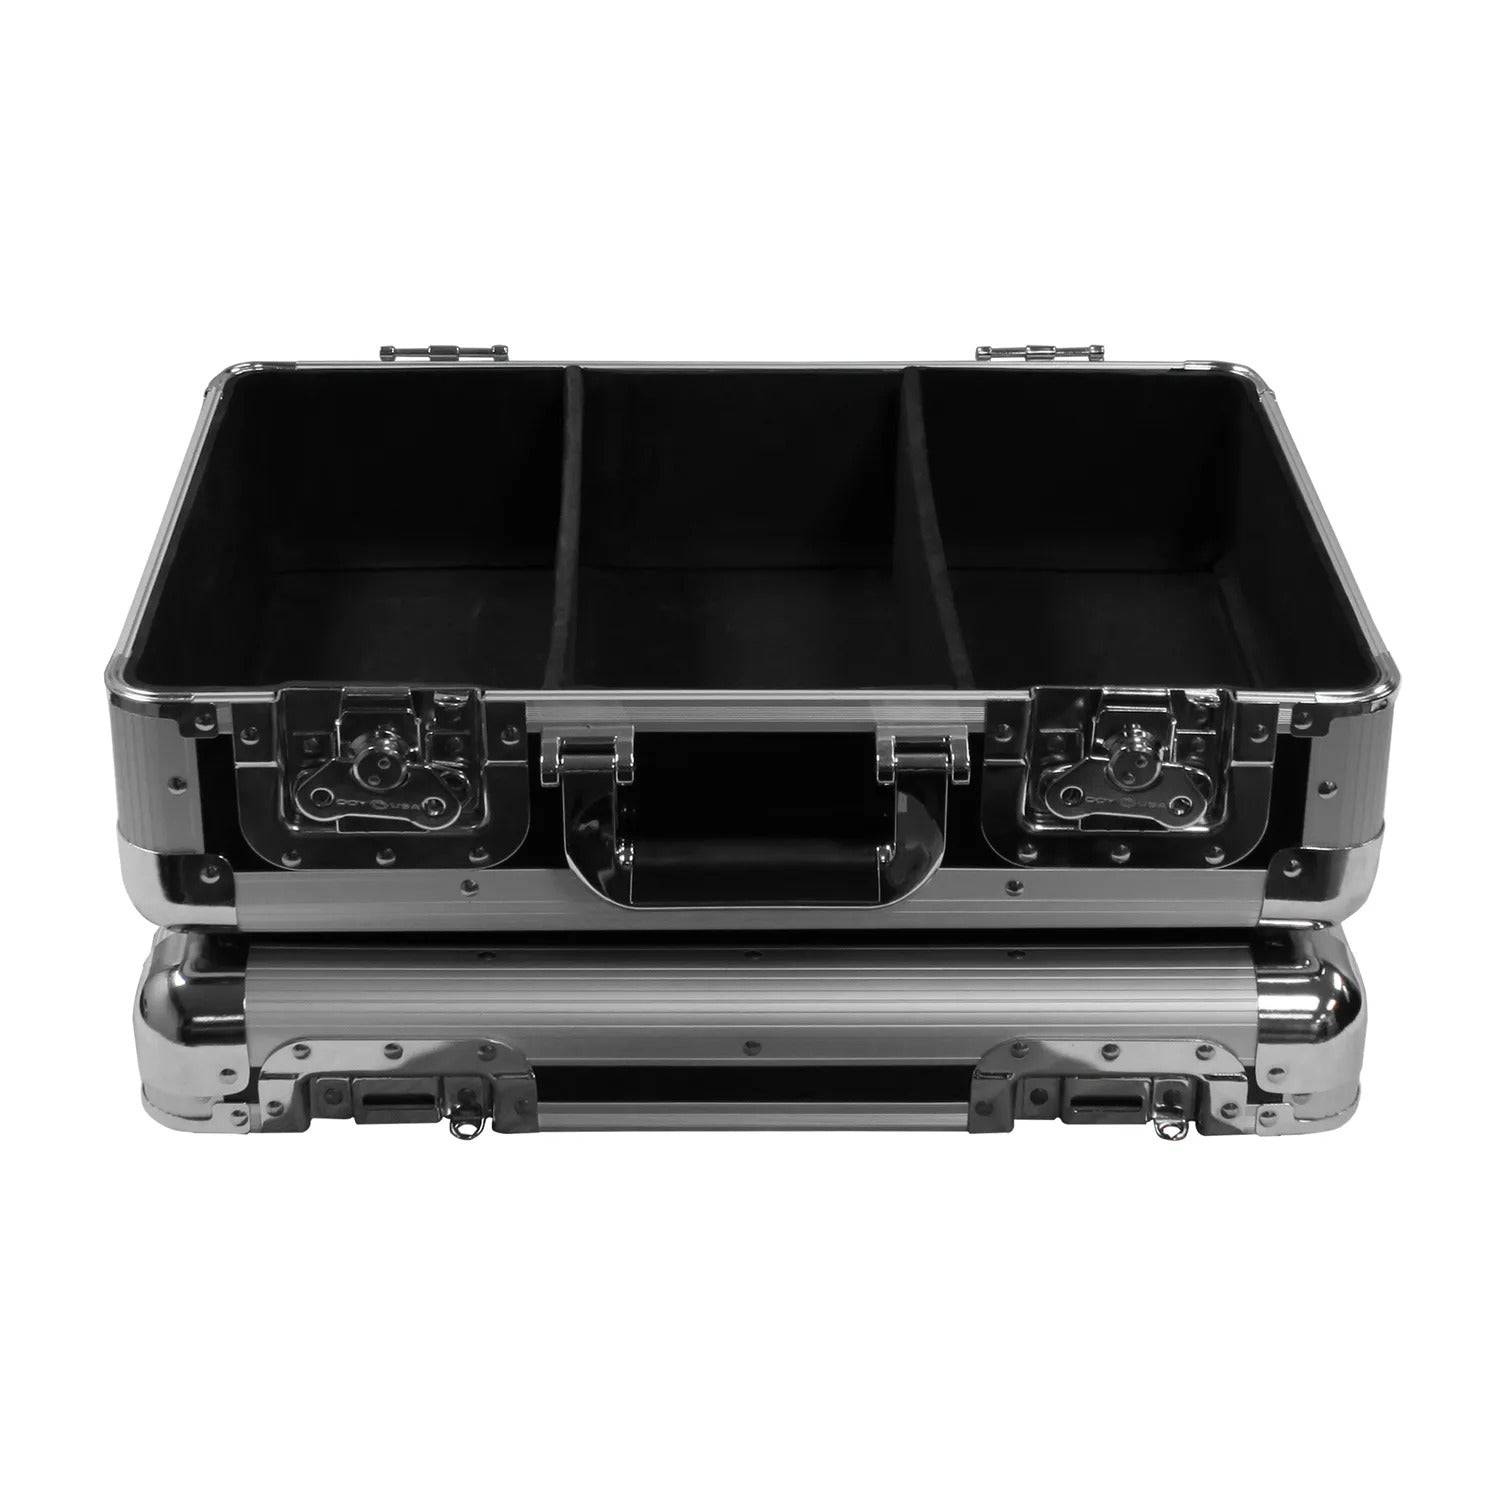 Odyssey KCD300BLK CD Case for 300 View Pack - Black - Hollywood DJ